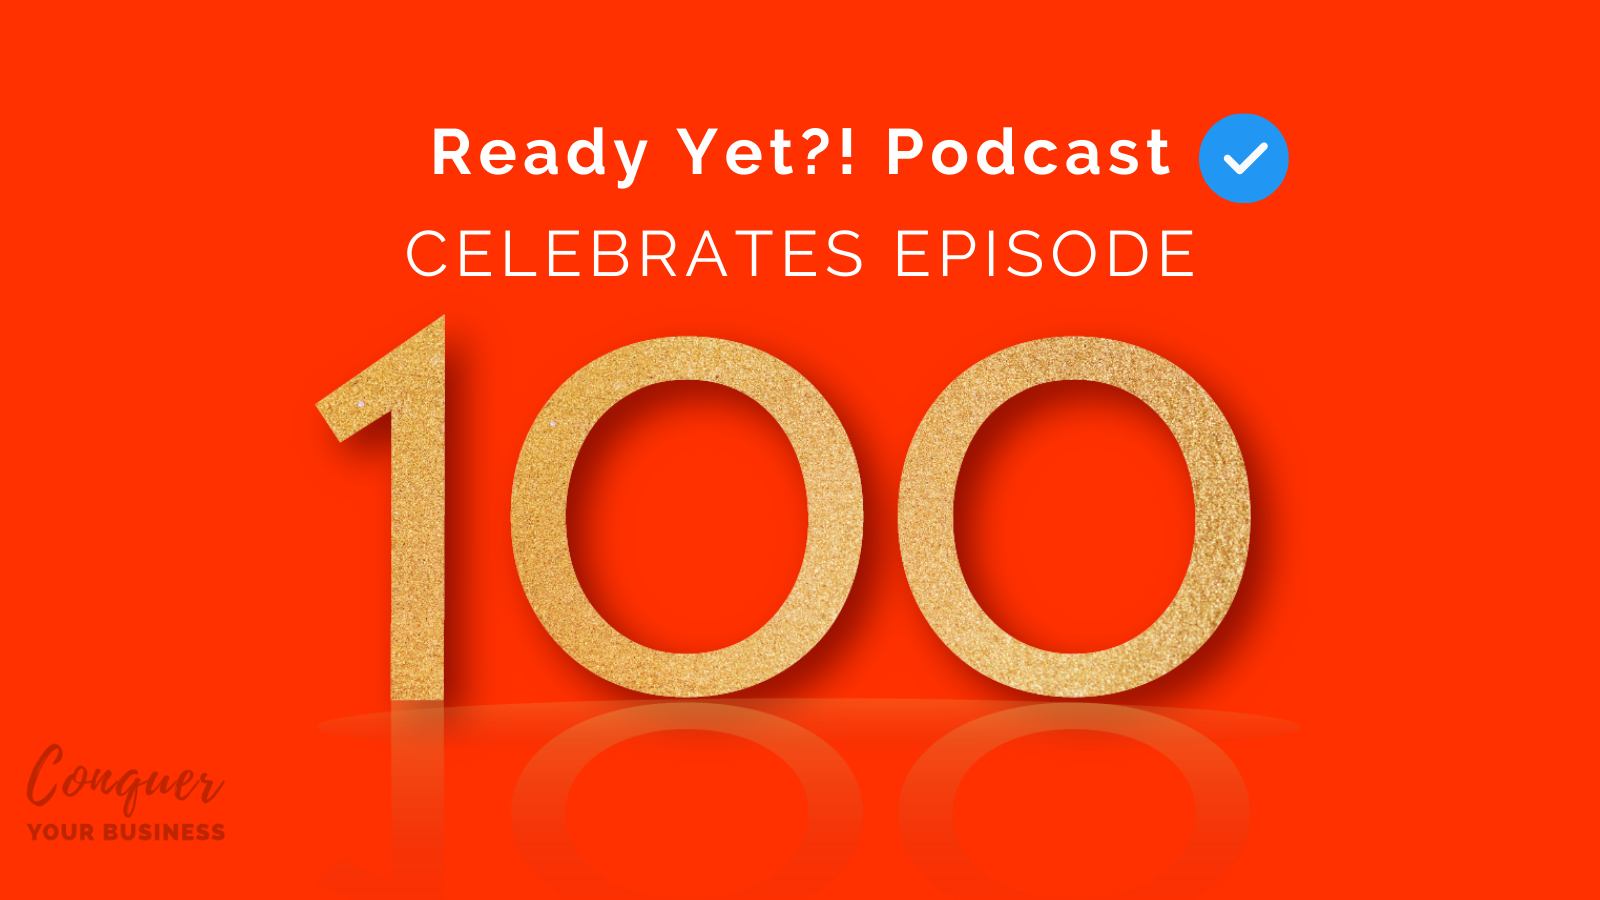 episode 100 conquer your business podcast